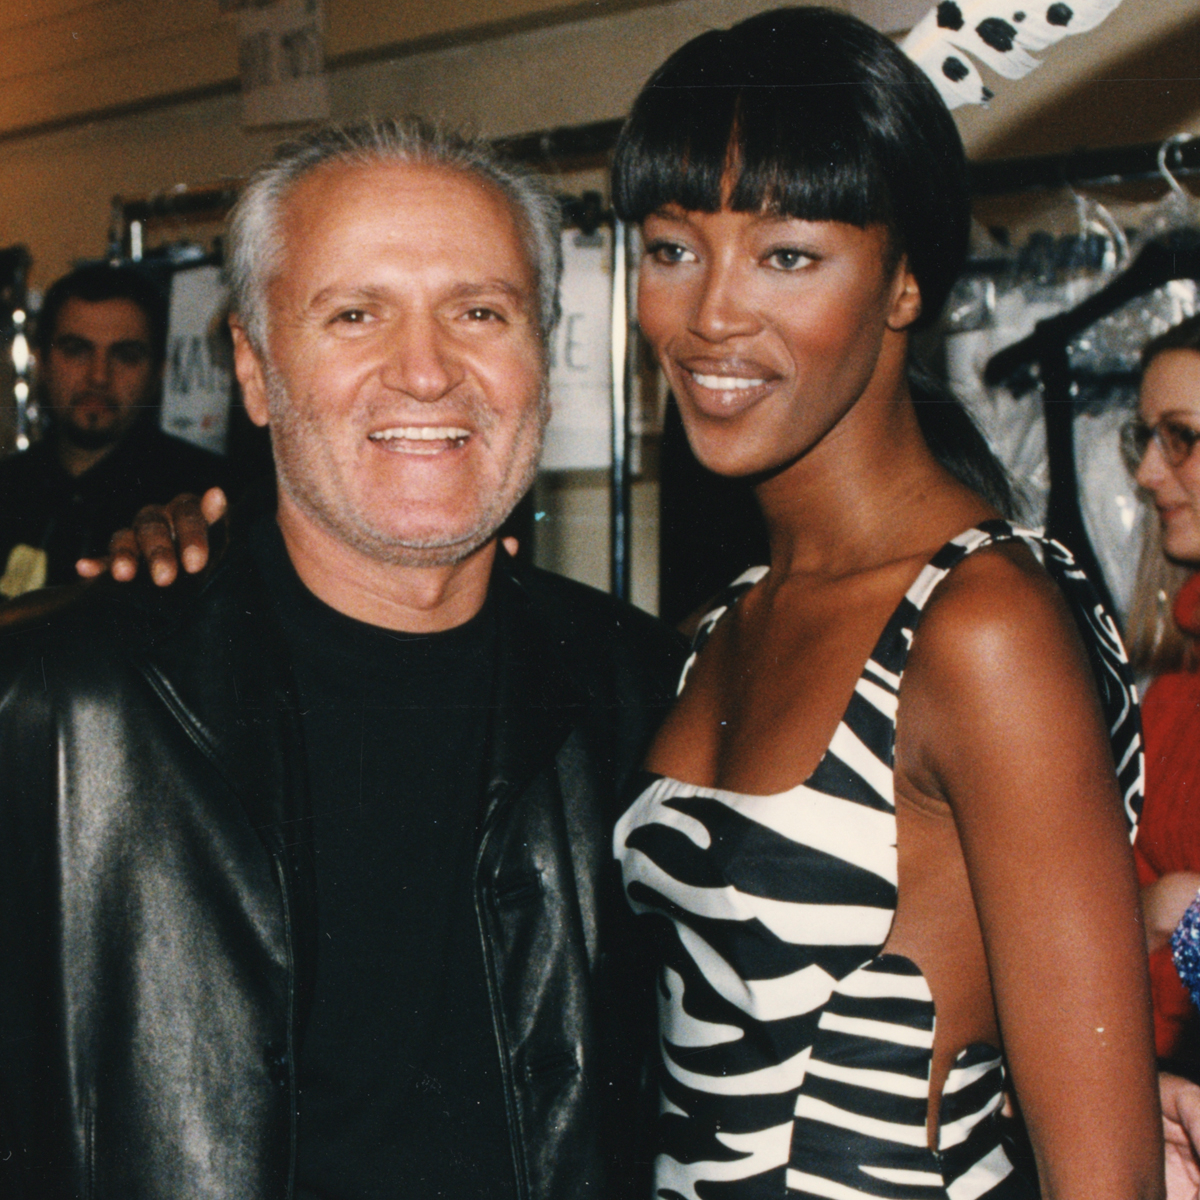 Gianni Versace - Life in Pictures